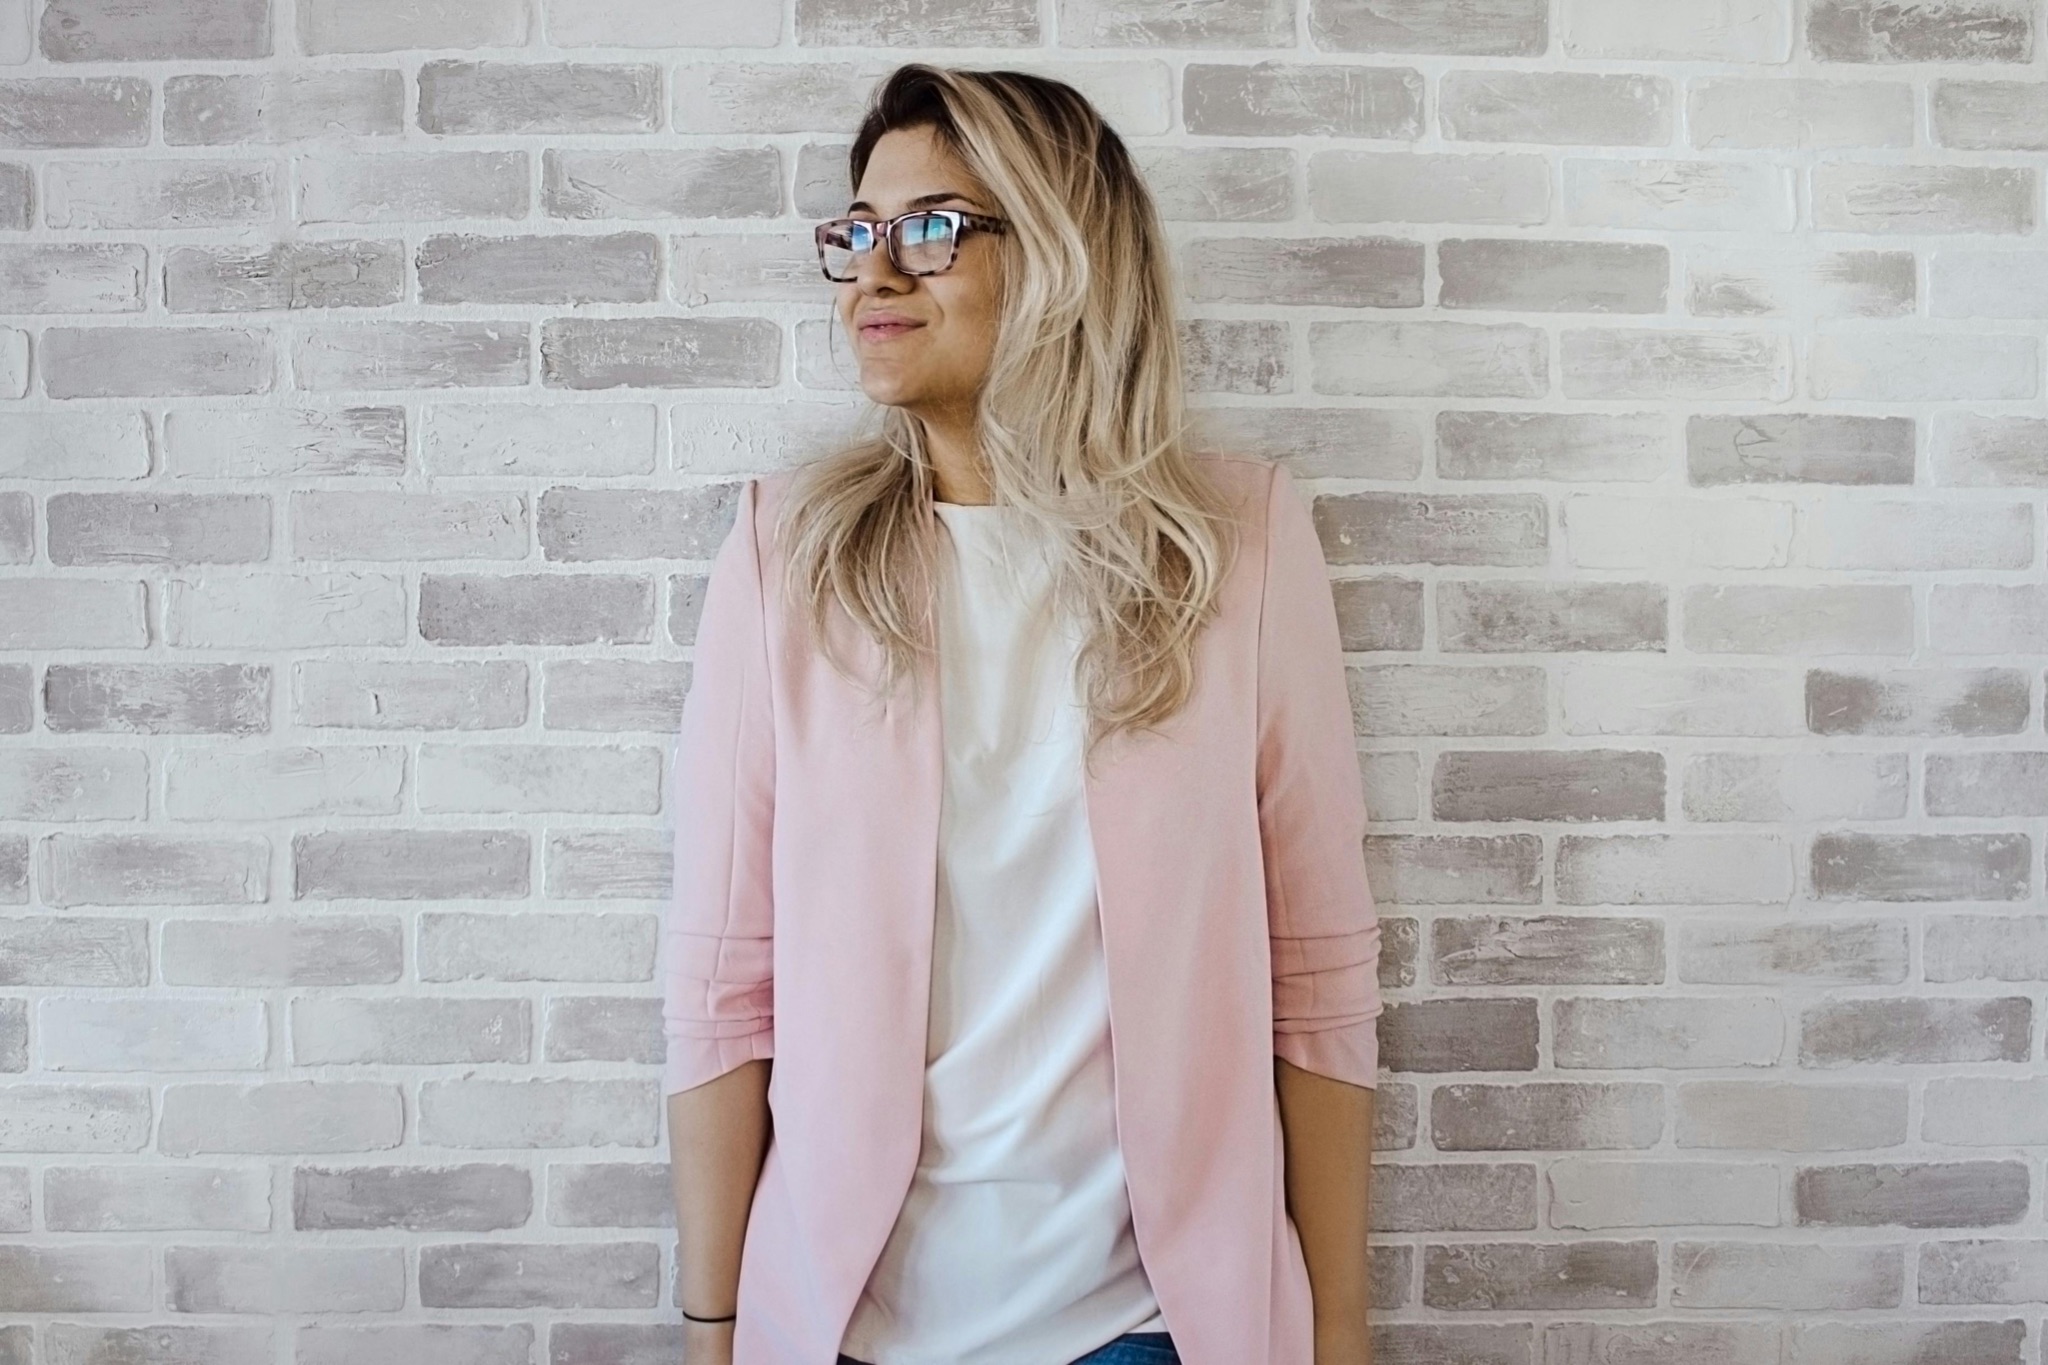 https://www.pexels.com/photo/woman-in-pink-cardigan-and-white-shirt-leaning-on-the-wall-975657/